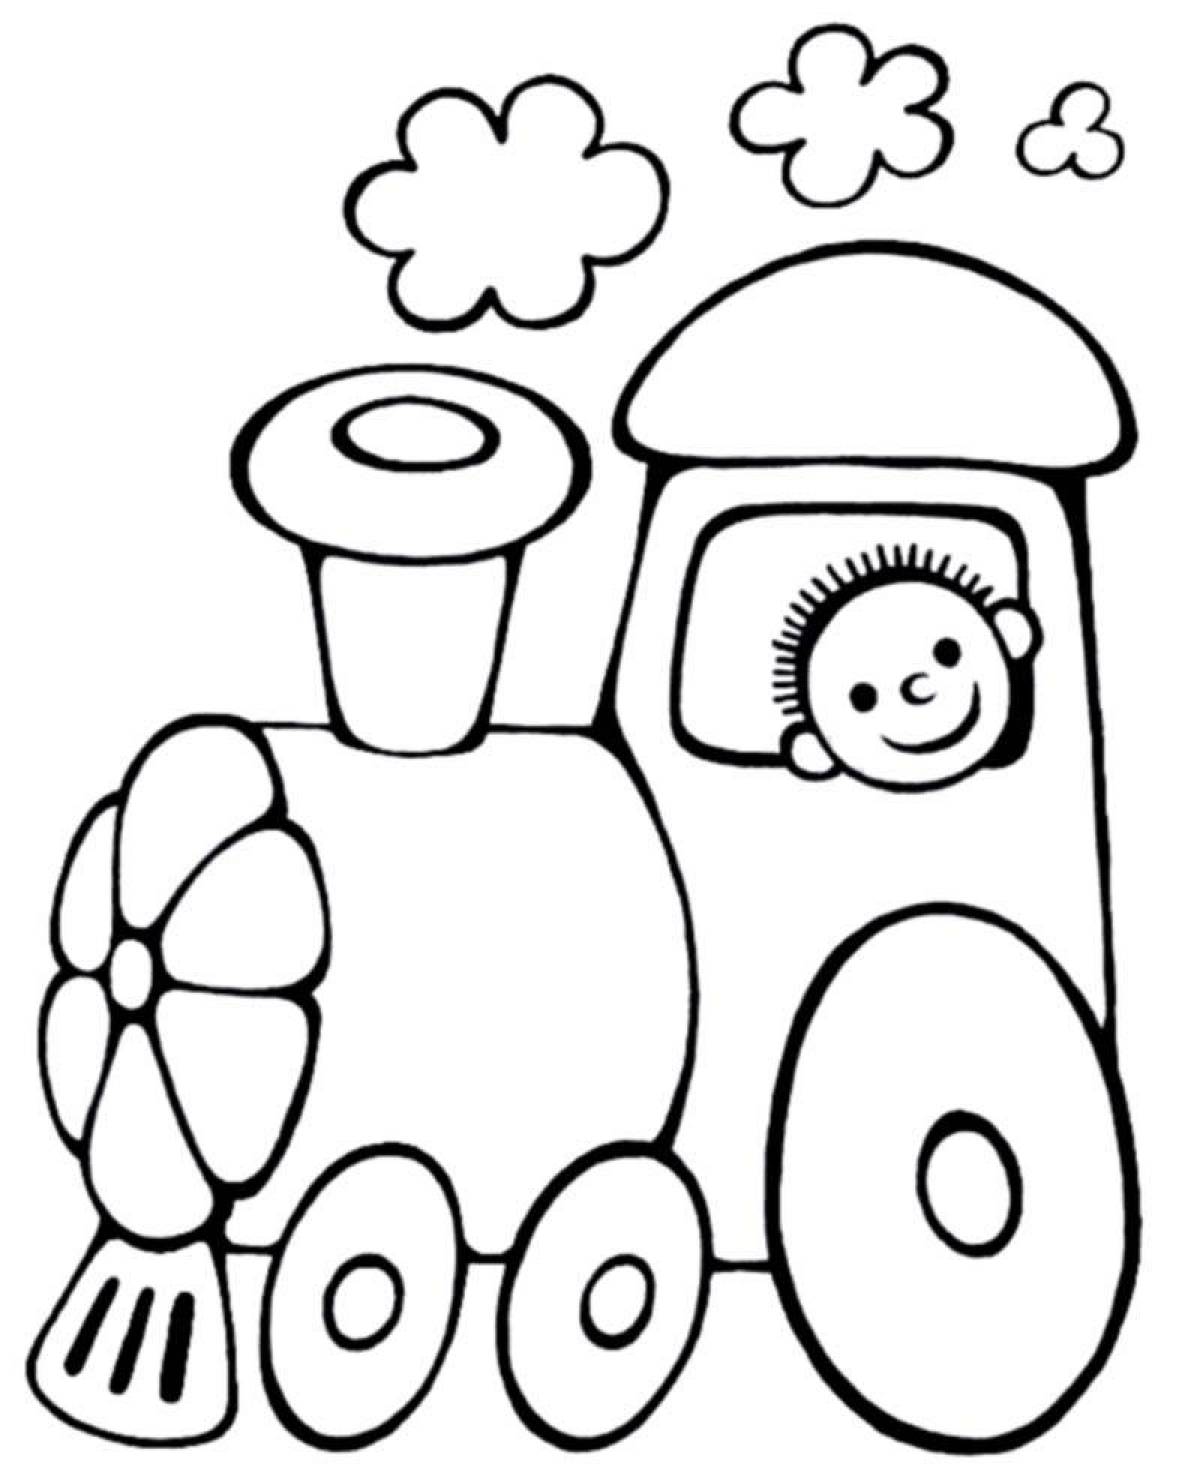 Adorable coloring book for 2-3 year olds